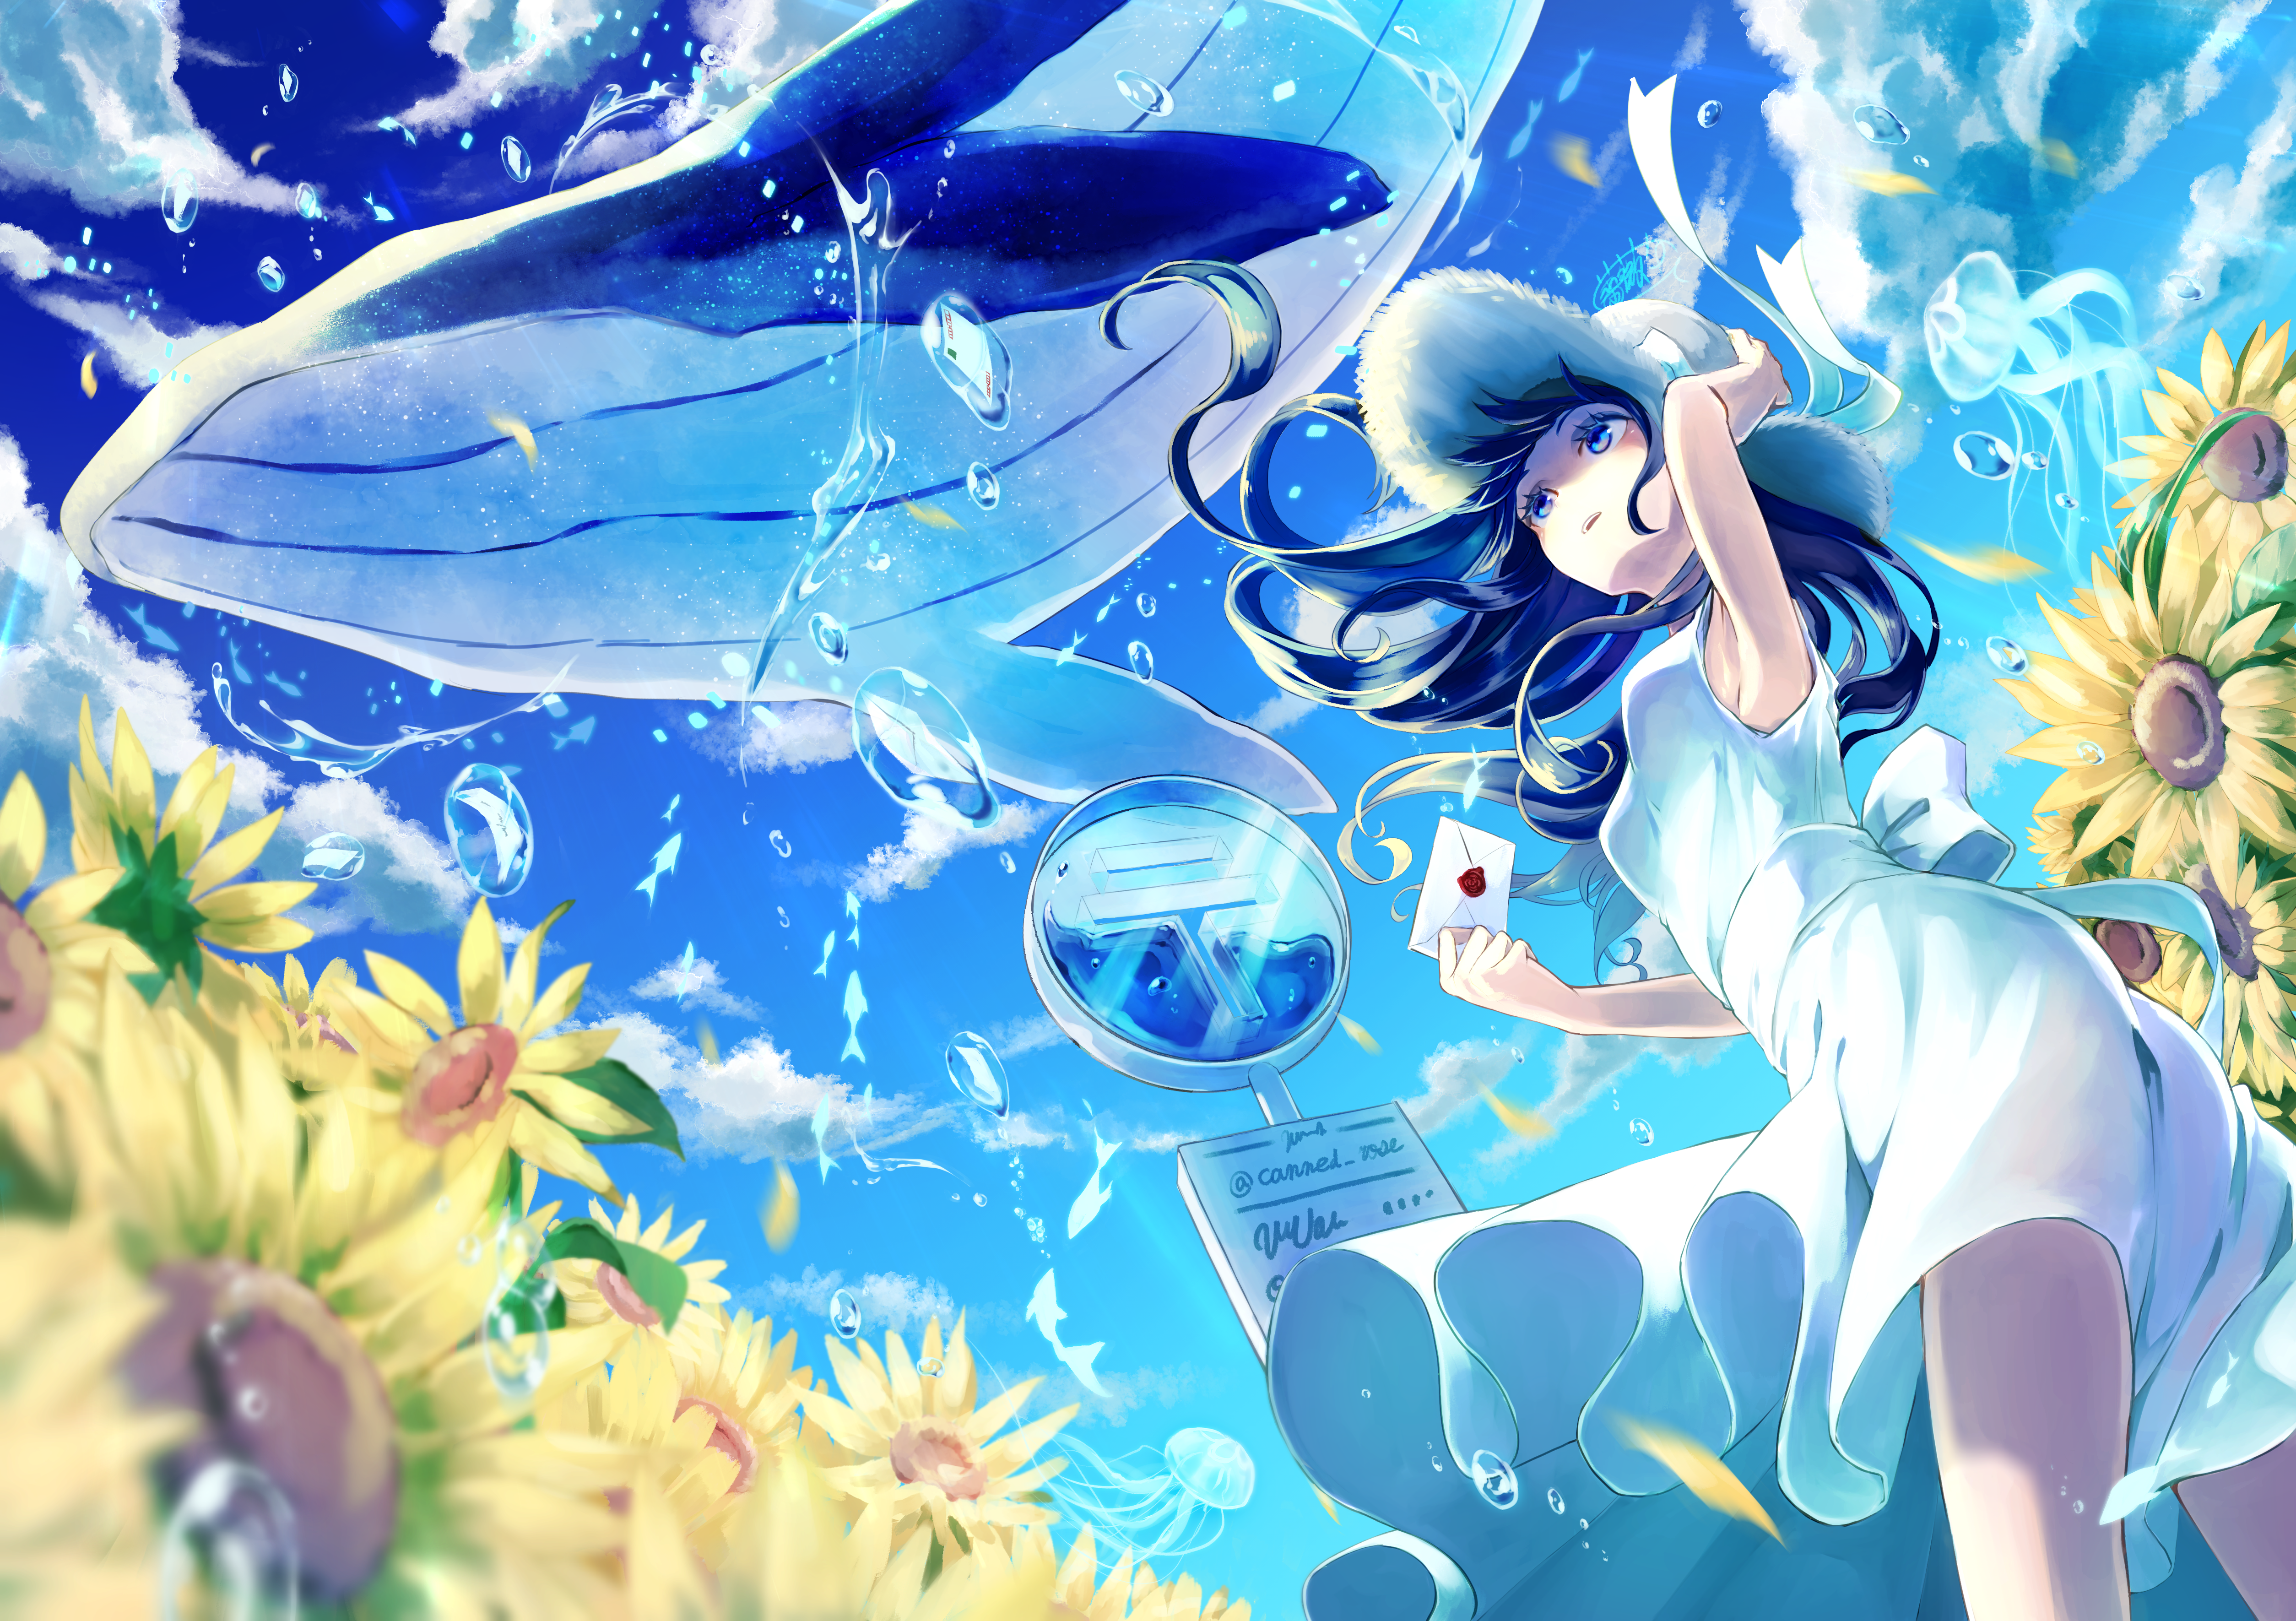 Anime Girls Anime Looking Up Whale Flying Whales Clouds Sky Wind Dress Sunflowers Long Hair Letter W 5016x3541